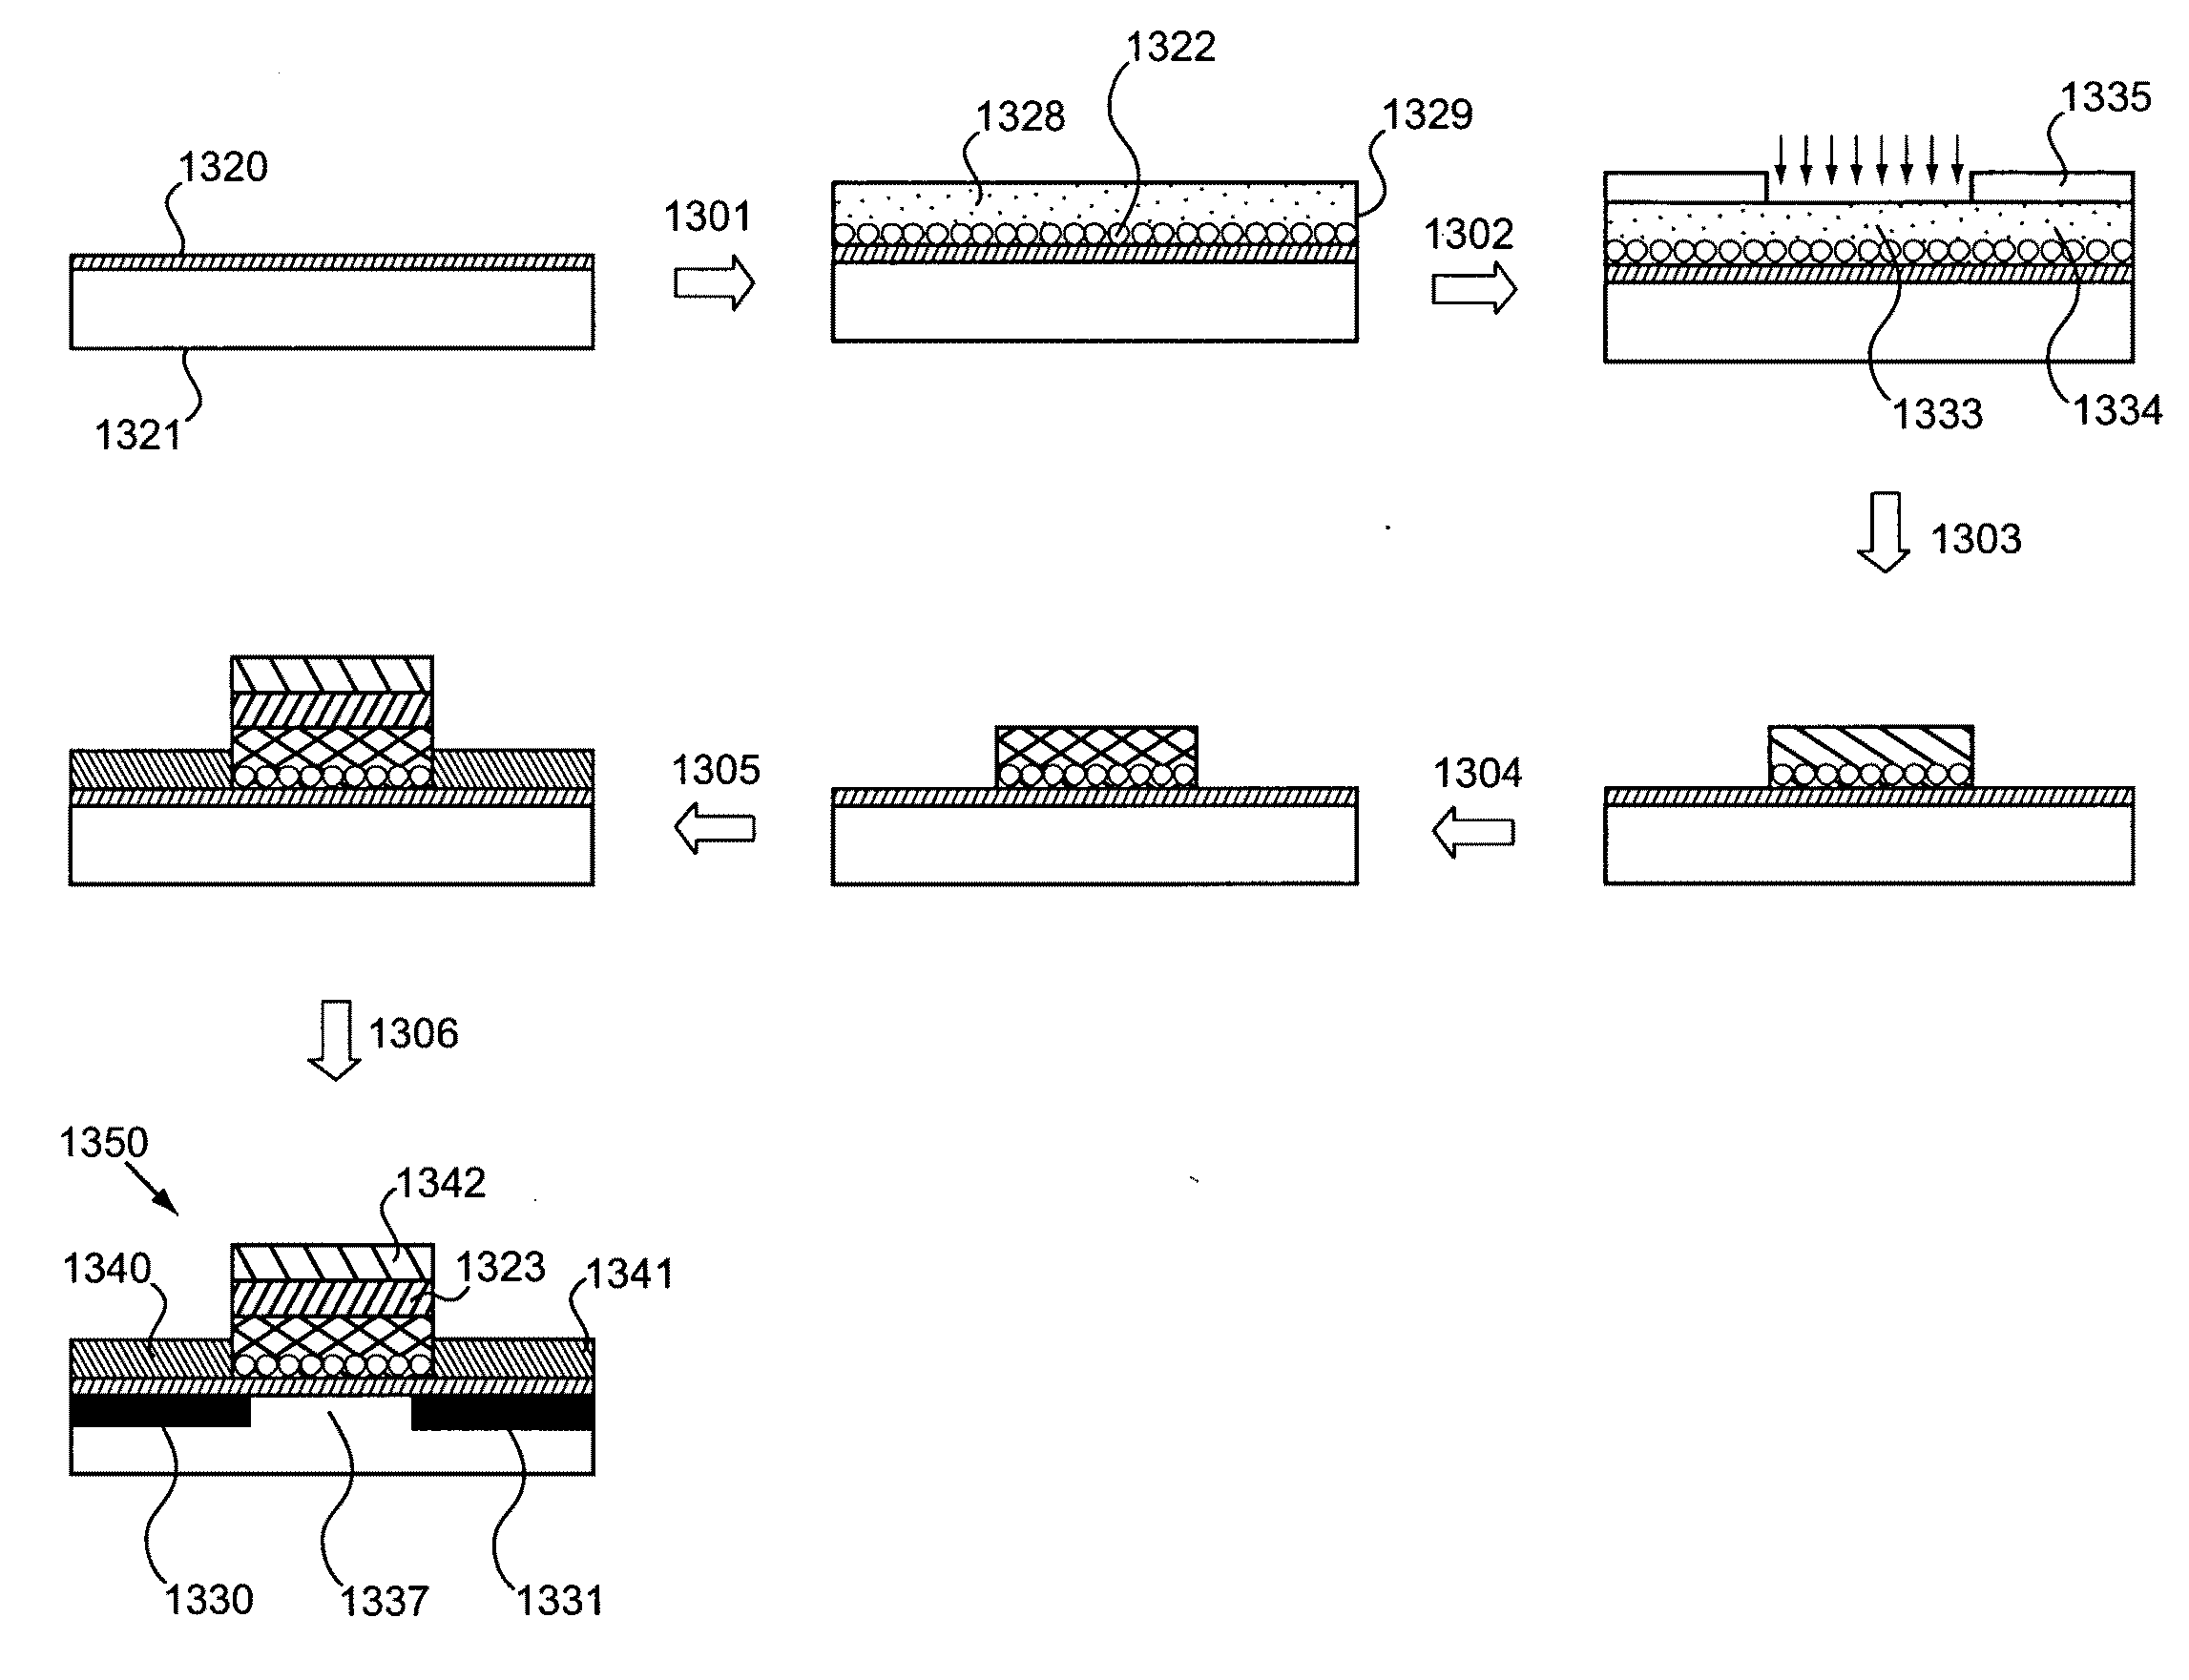 Methods and devices for forming nanostructure monolayers and devices including such monolayers